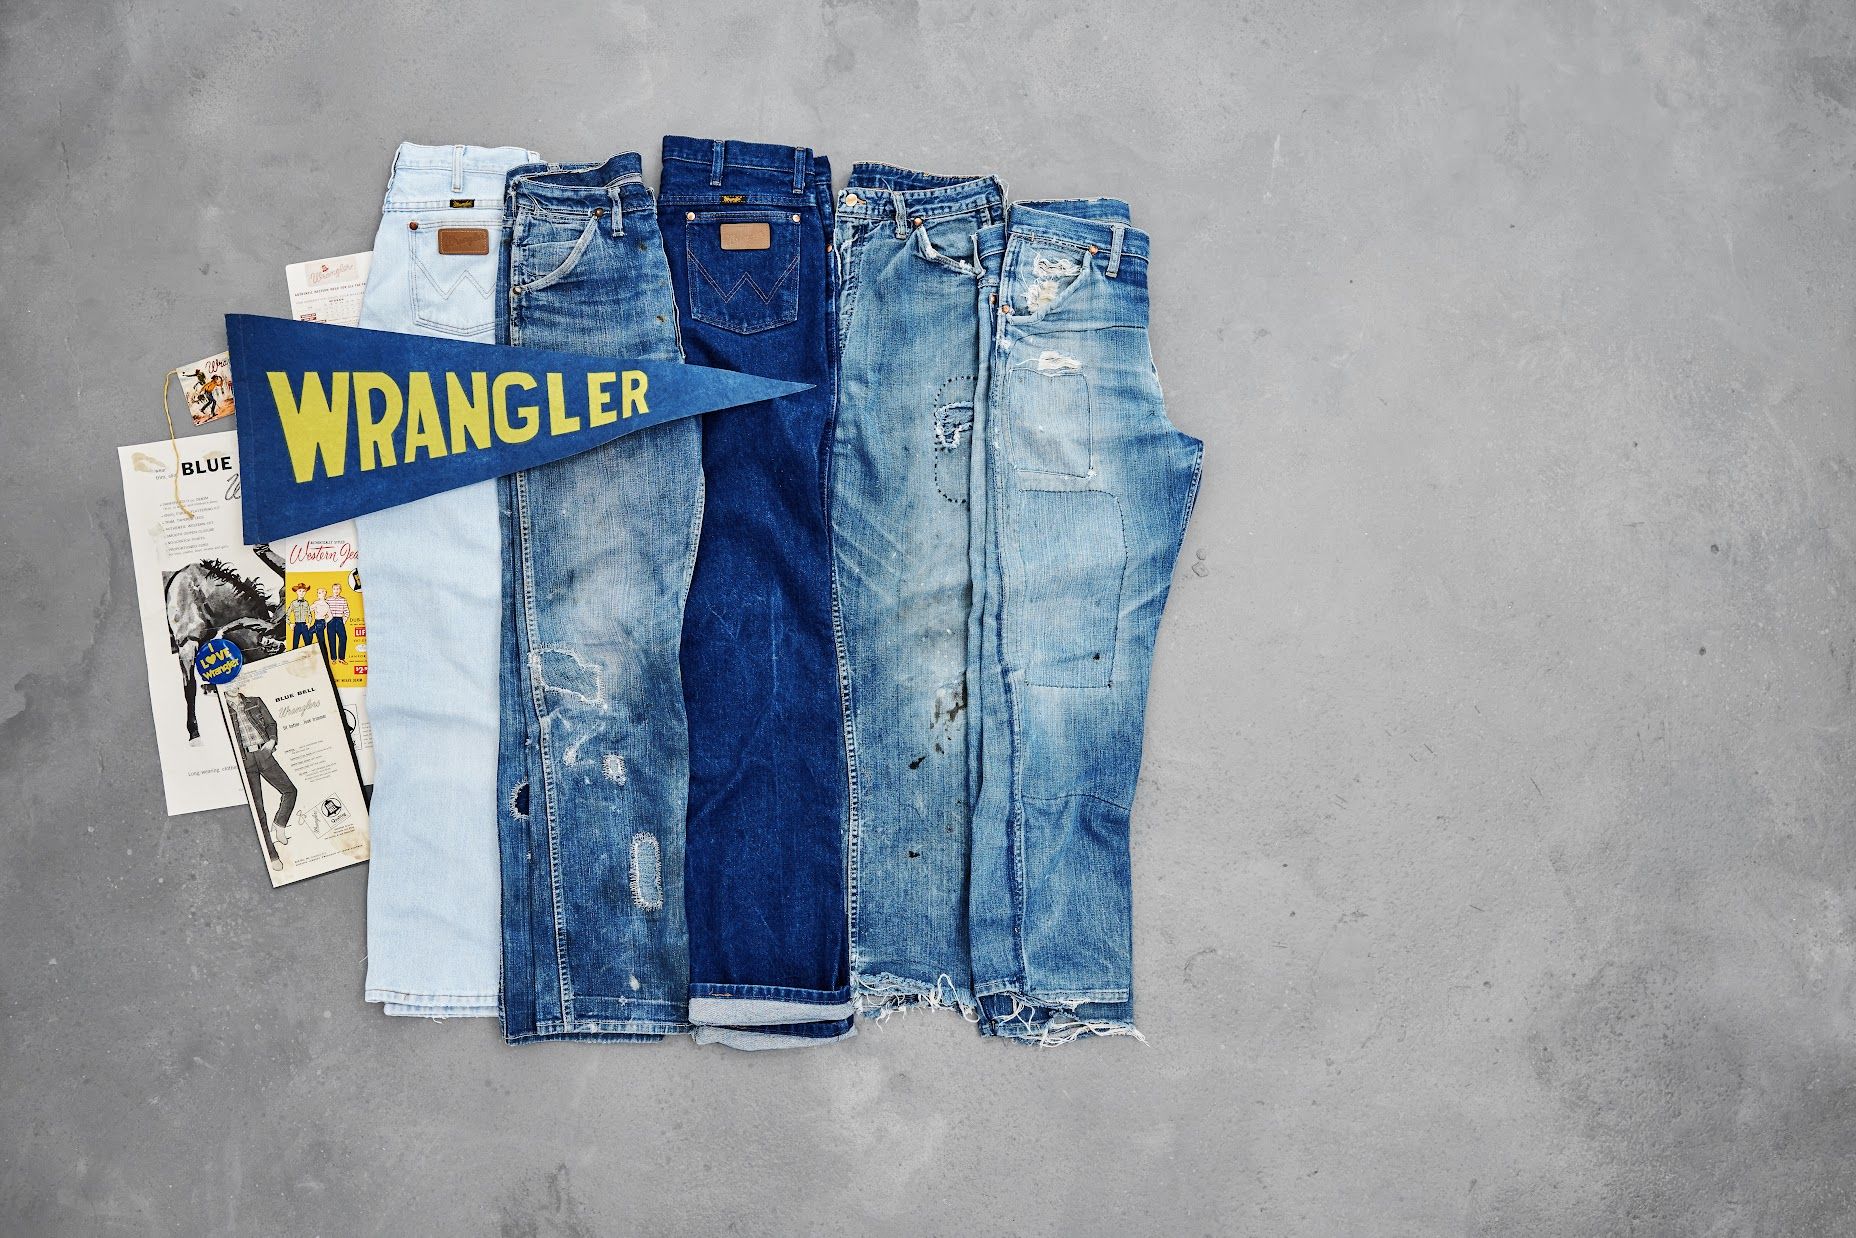 Wrangler Now Selling Vintage Jeans the Masses